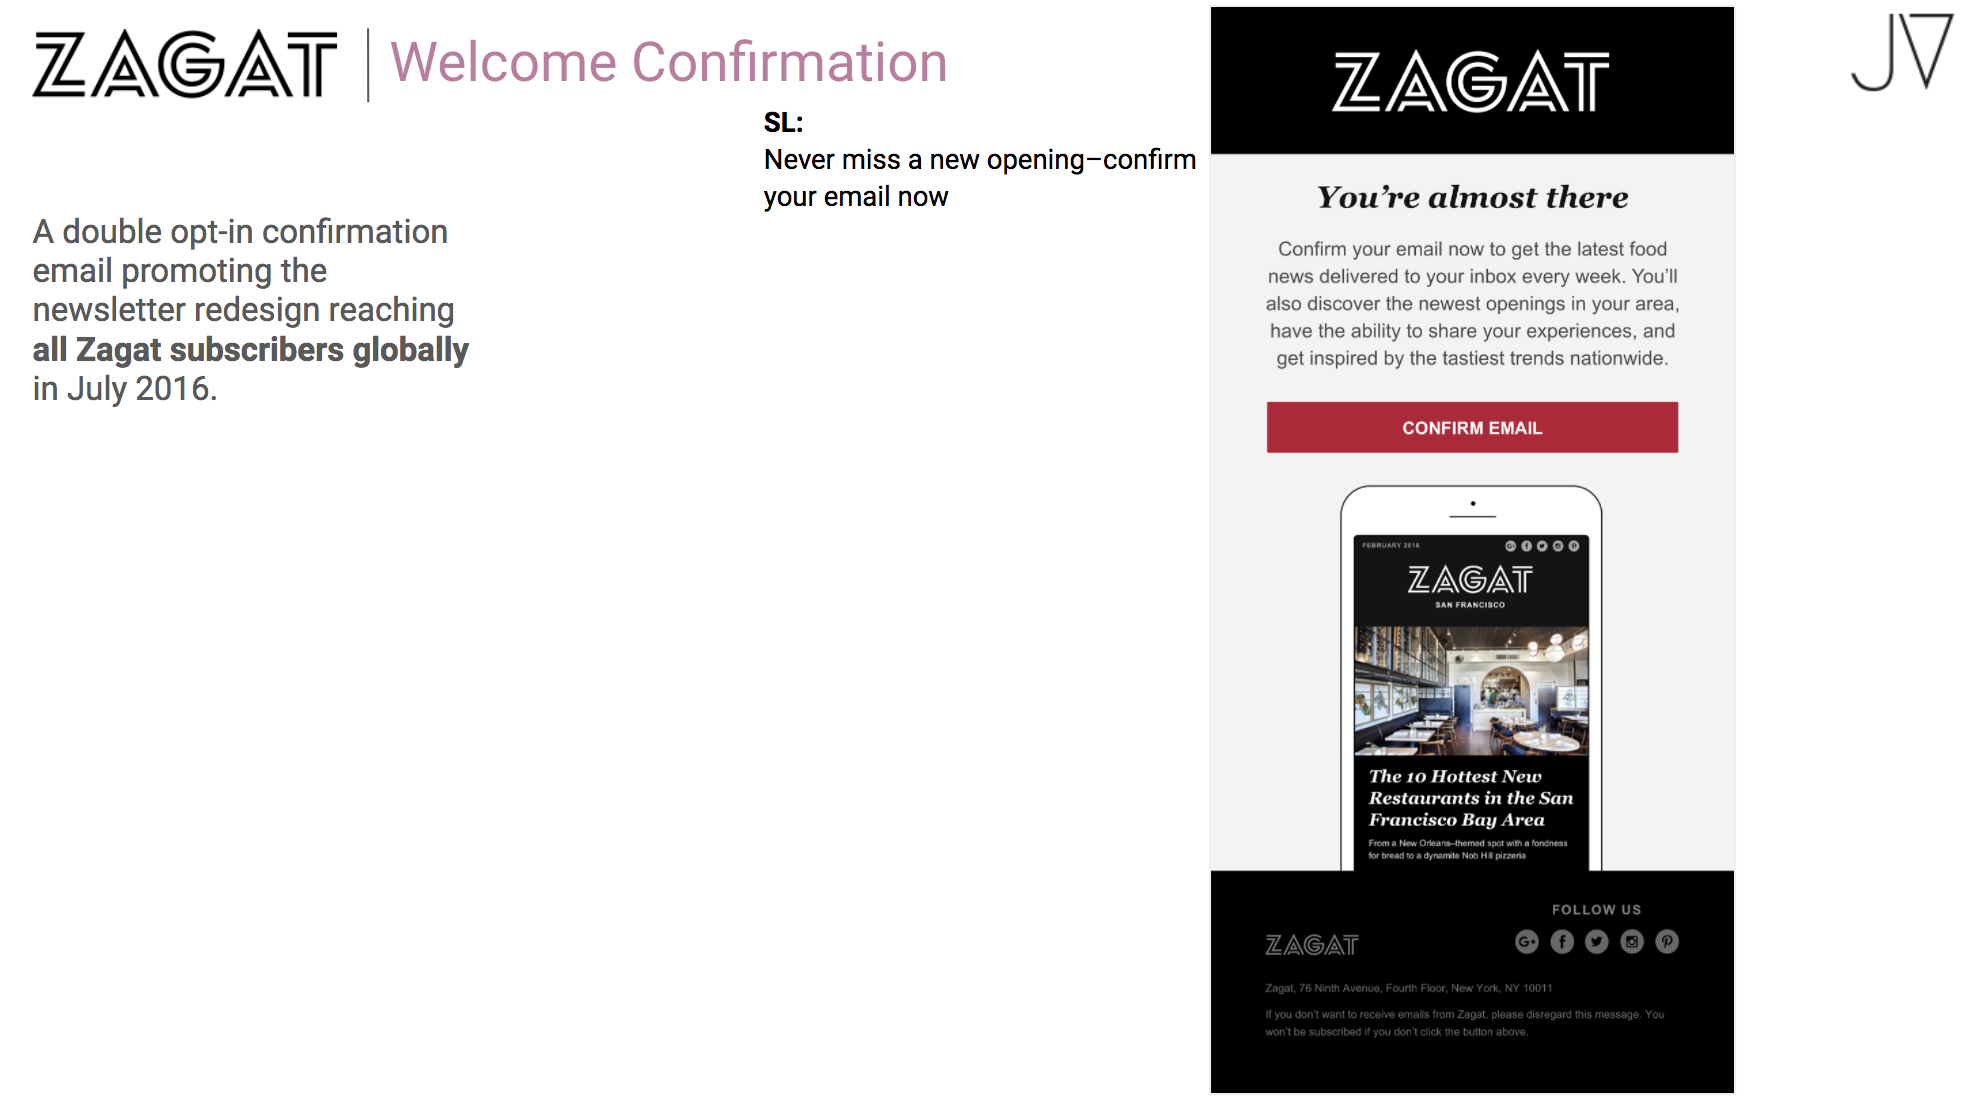 Zagat_Welcome Confirmation_Epsilon_updated.png